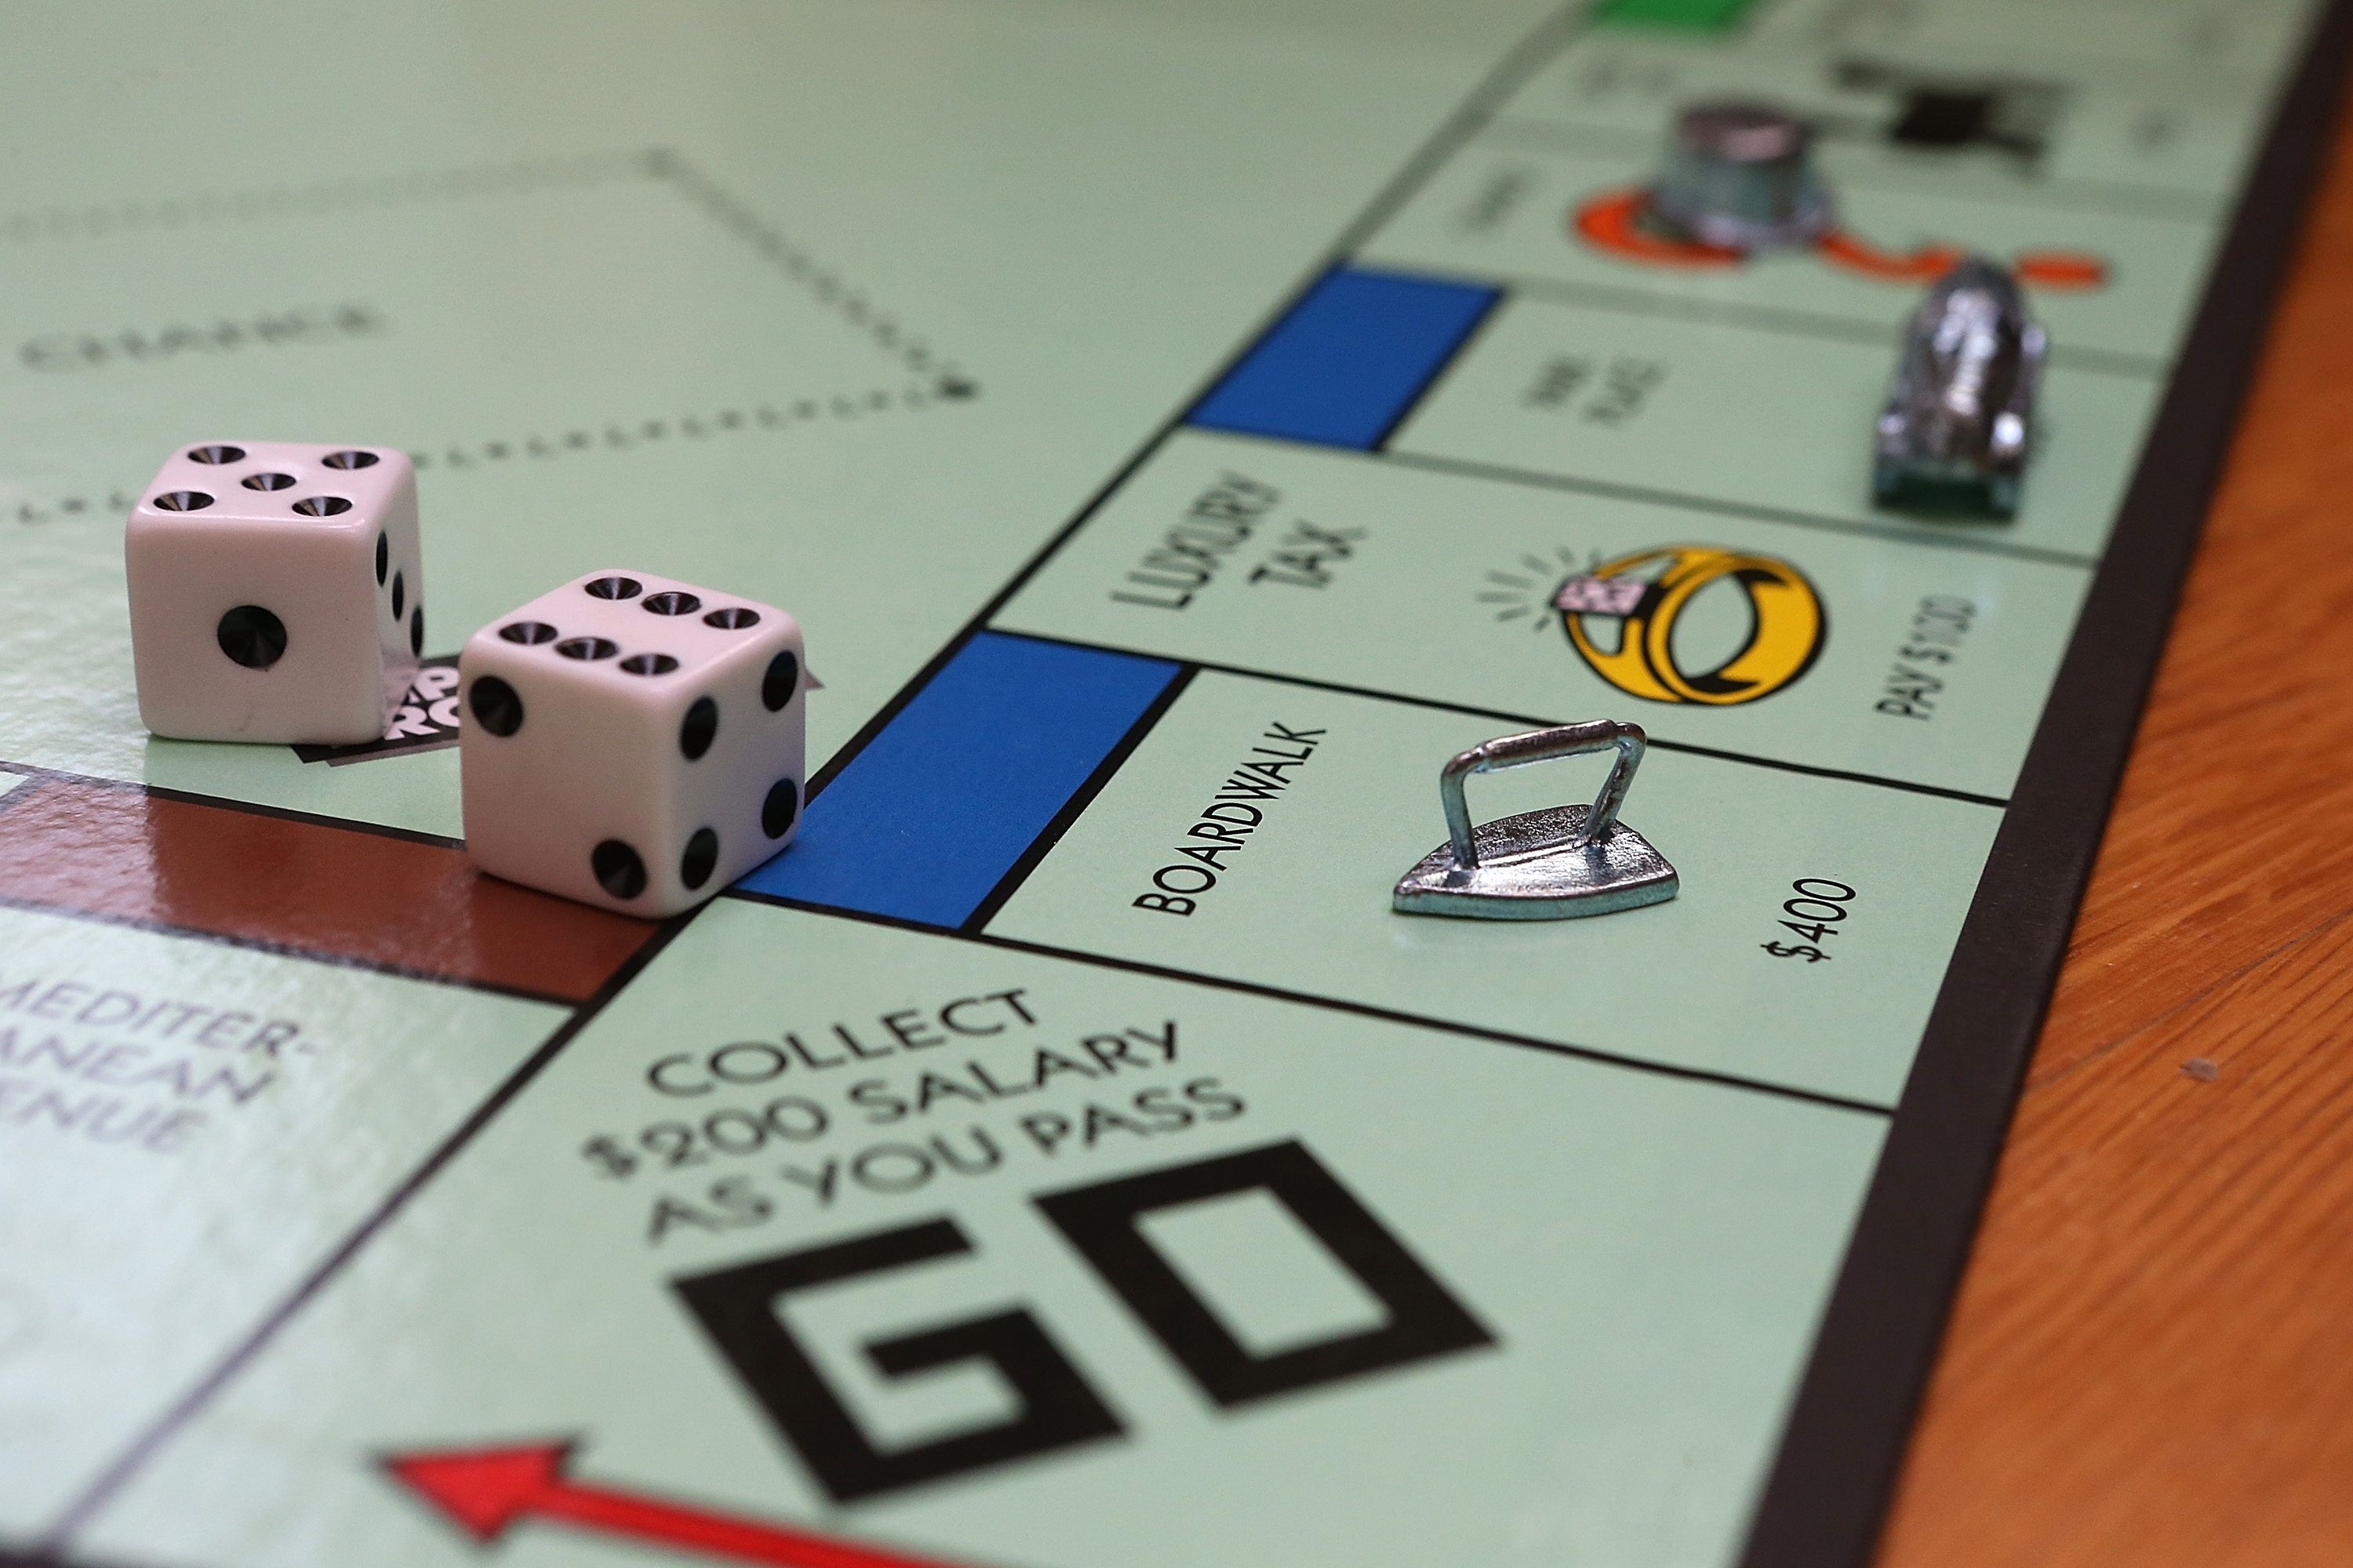 ms monopoly controversy